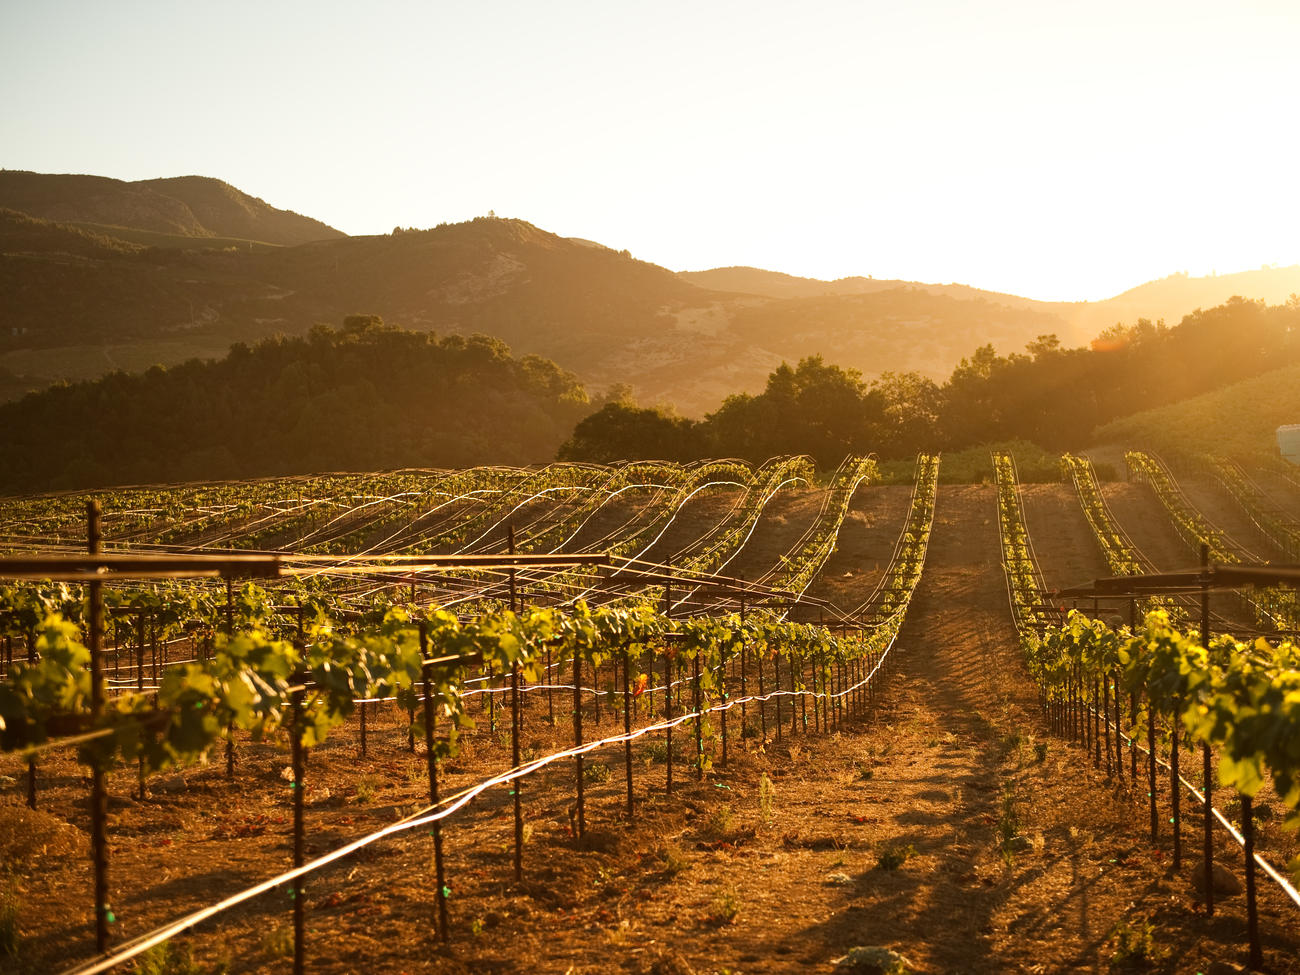 10 Charitable Gifts to Benefit Wine Country Relief Efforts